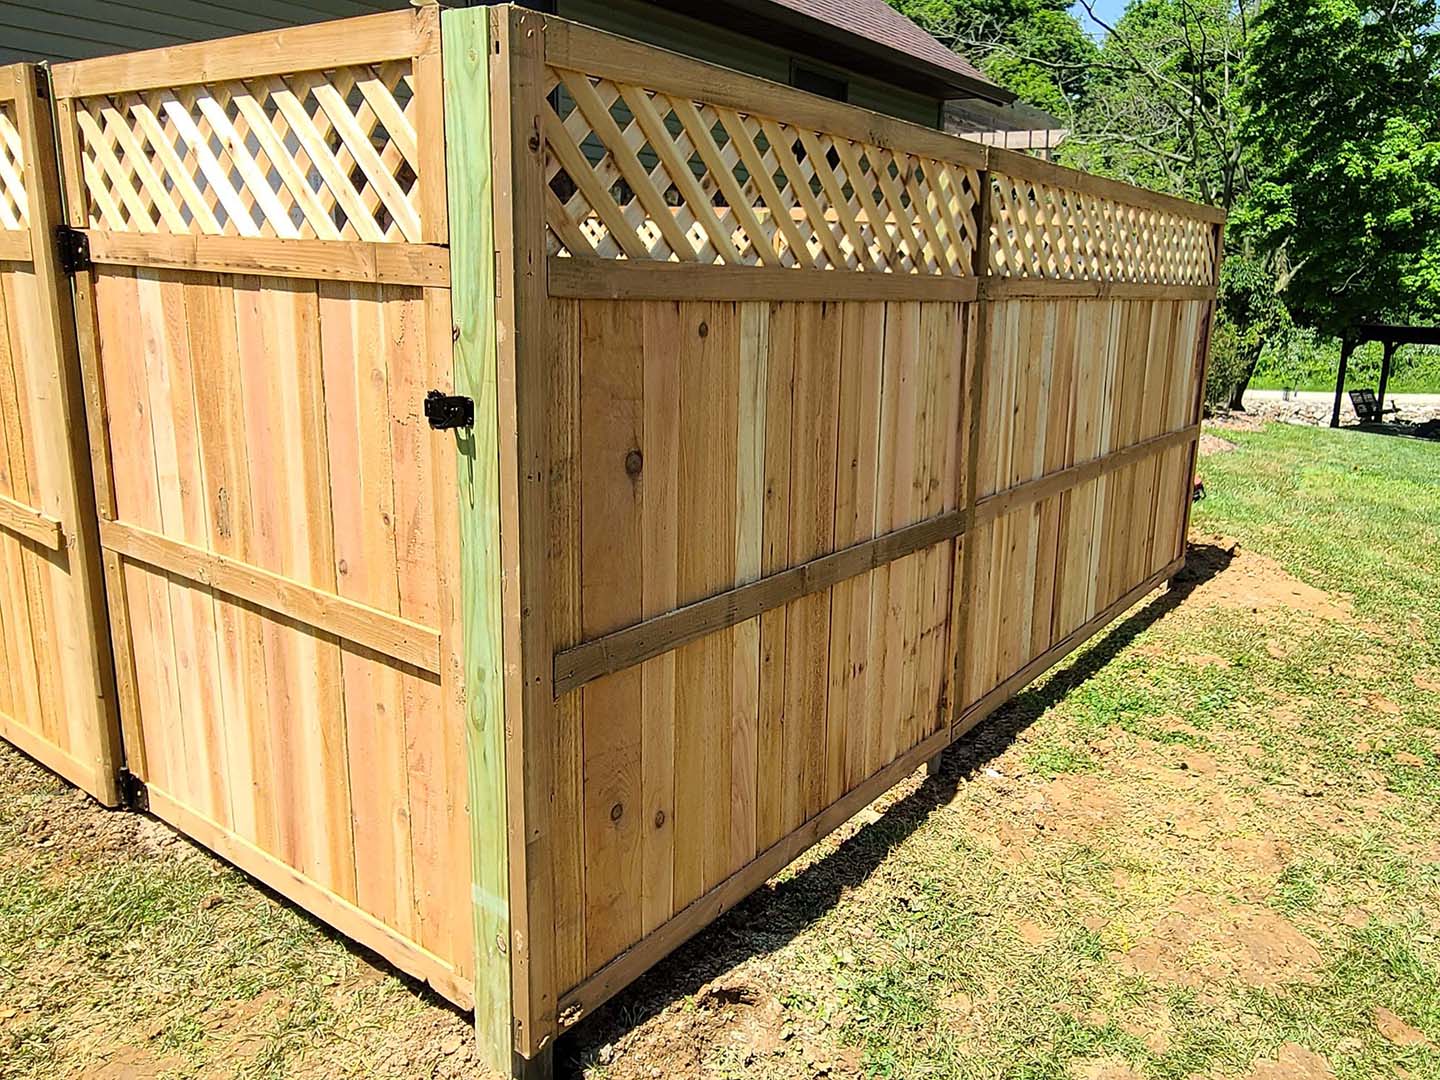 Nashville Indiana residential fencing company